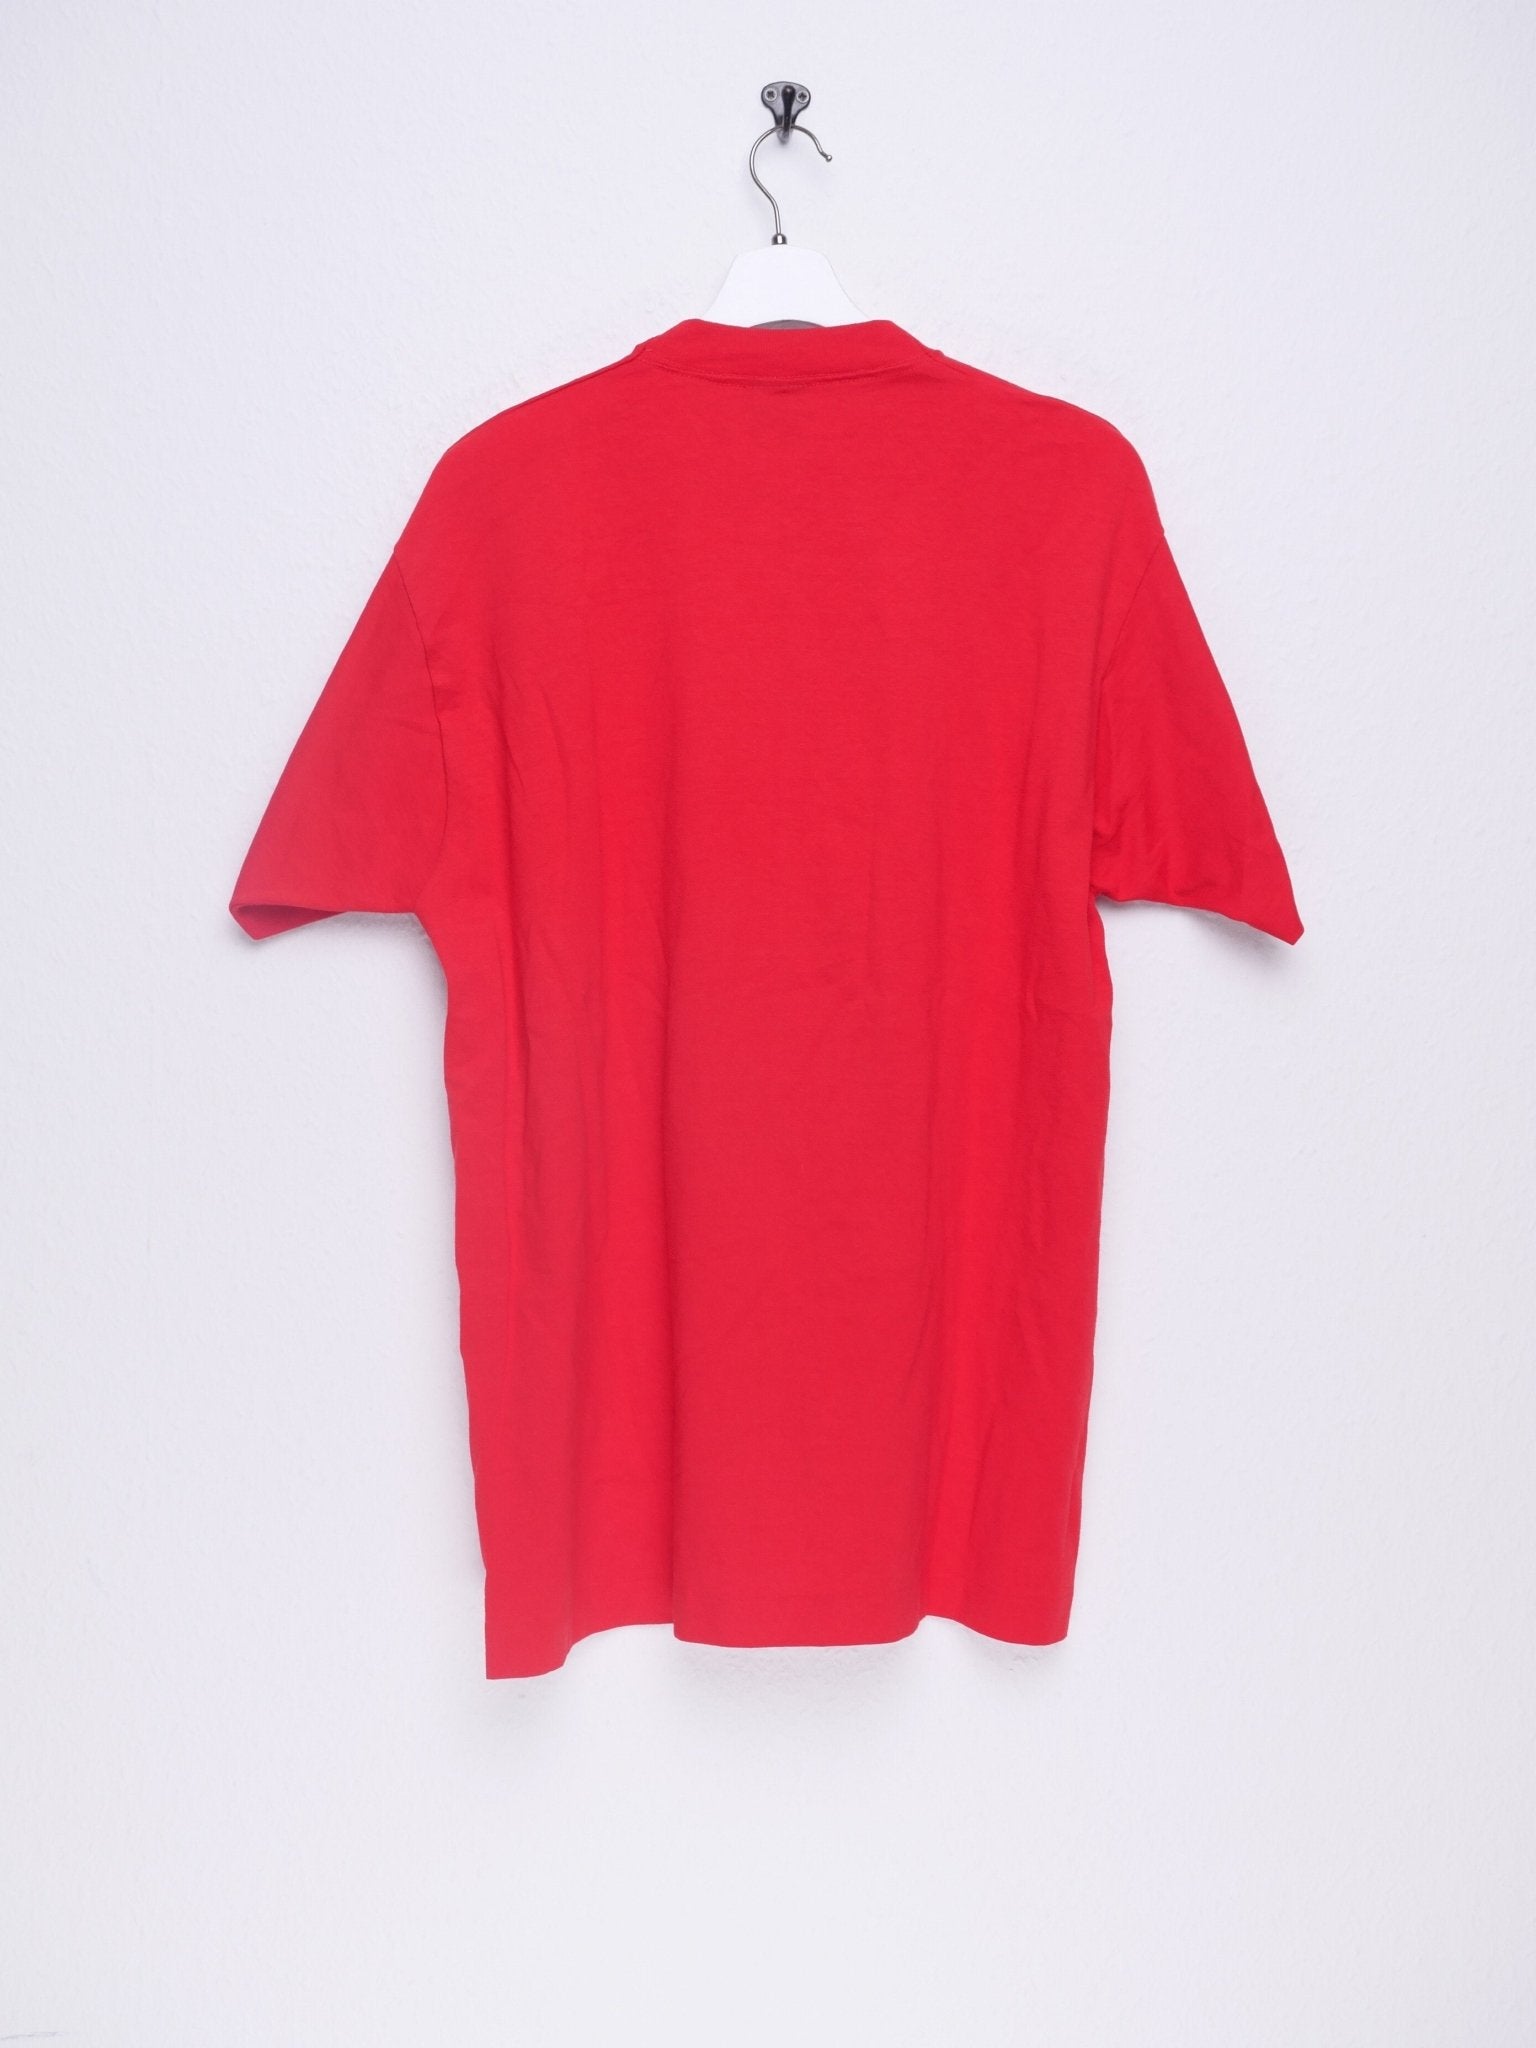 'Tools Day '90' printed Graphic red Shirt - Peeces